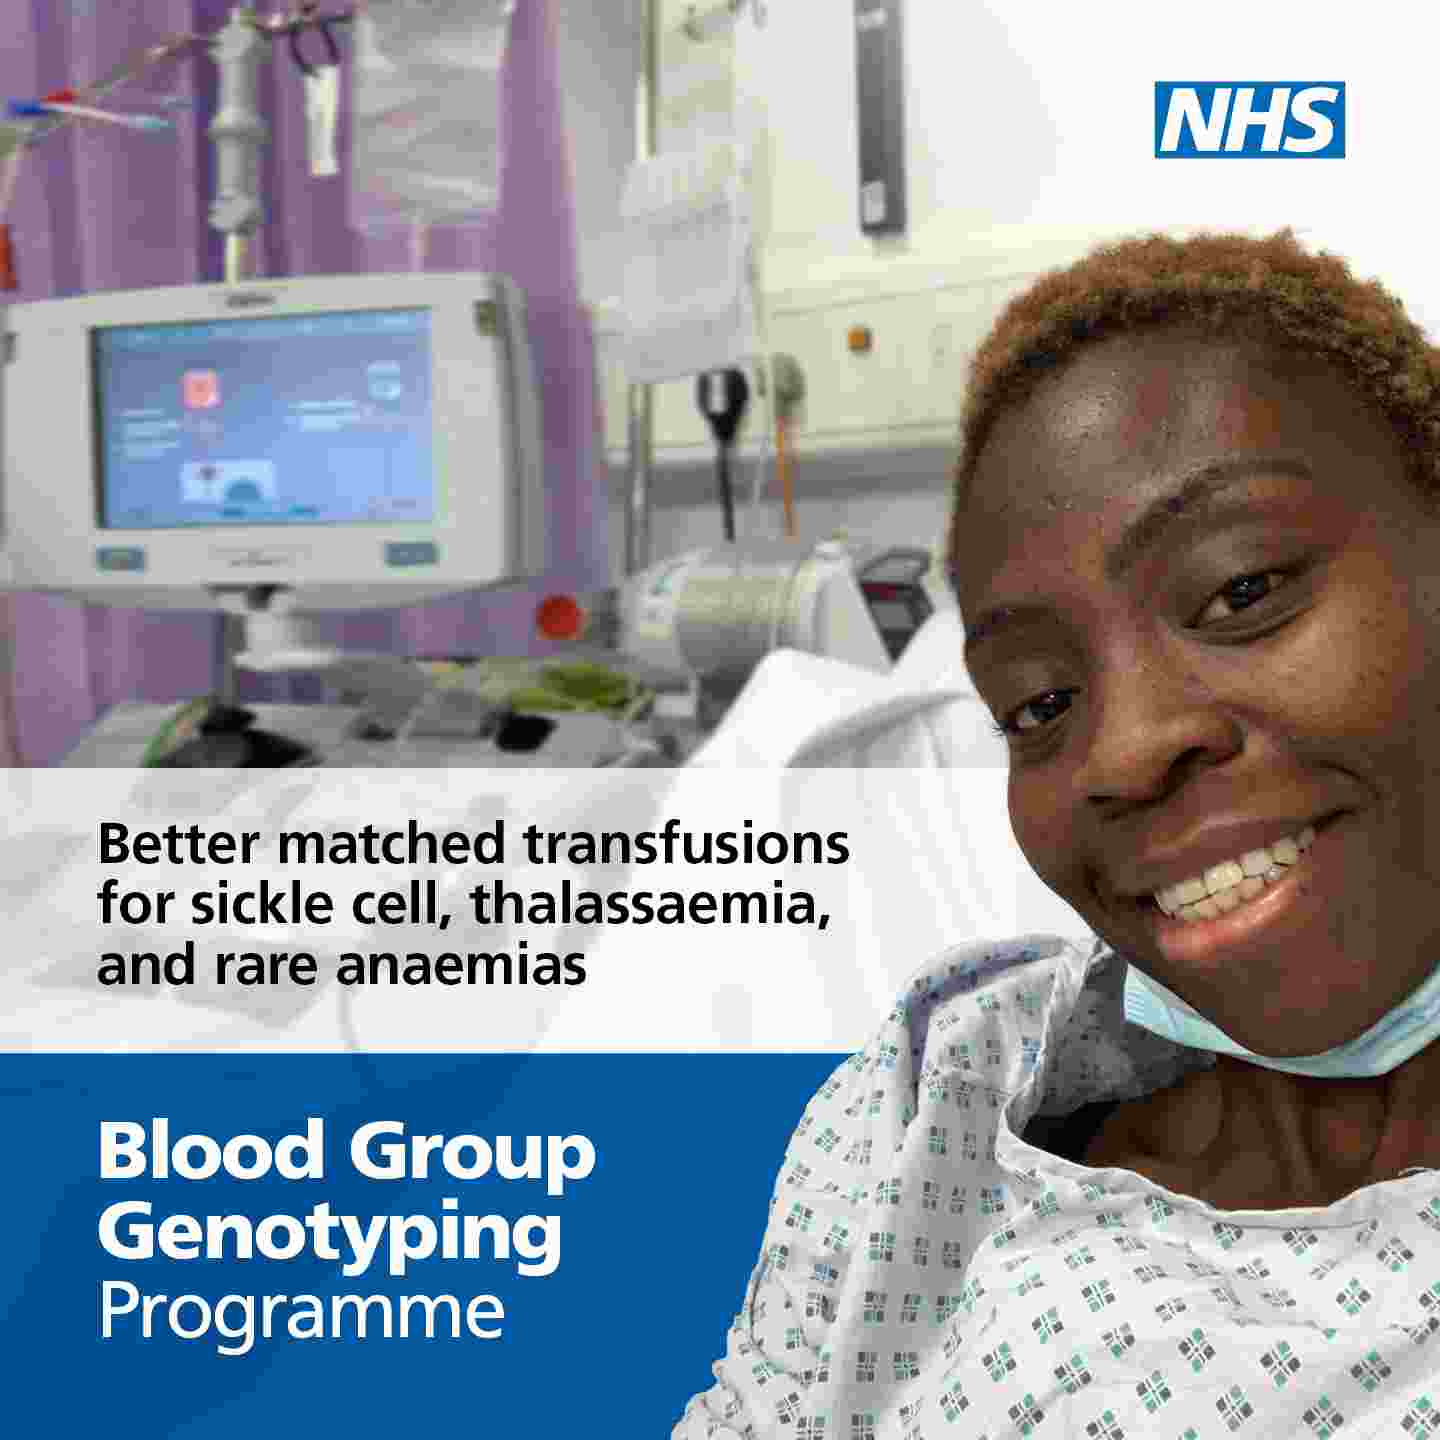 NHS graphic with black female patient in hospital gown stating 'Better matched transfusions for sickle cell, thalassaemia and rare anaemias - Blood Group Genotyping Programme'